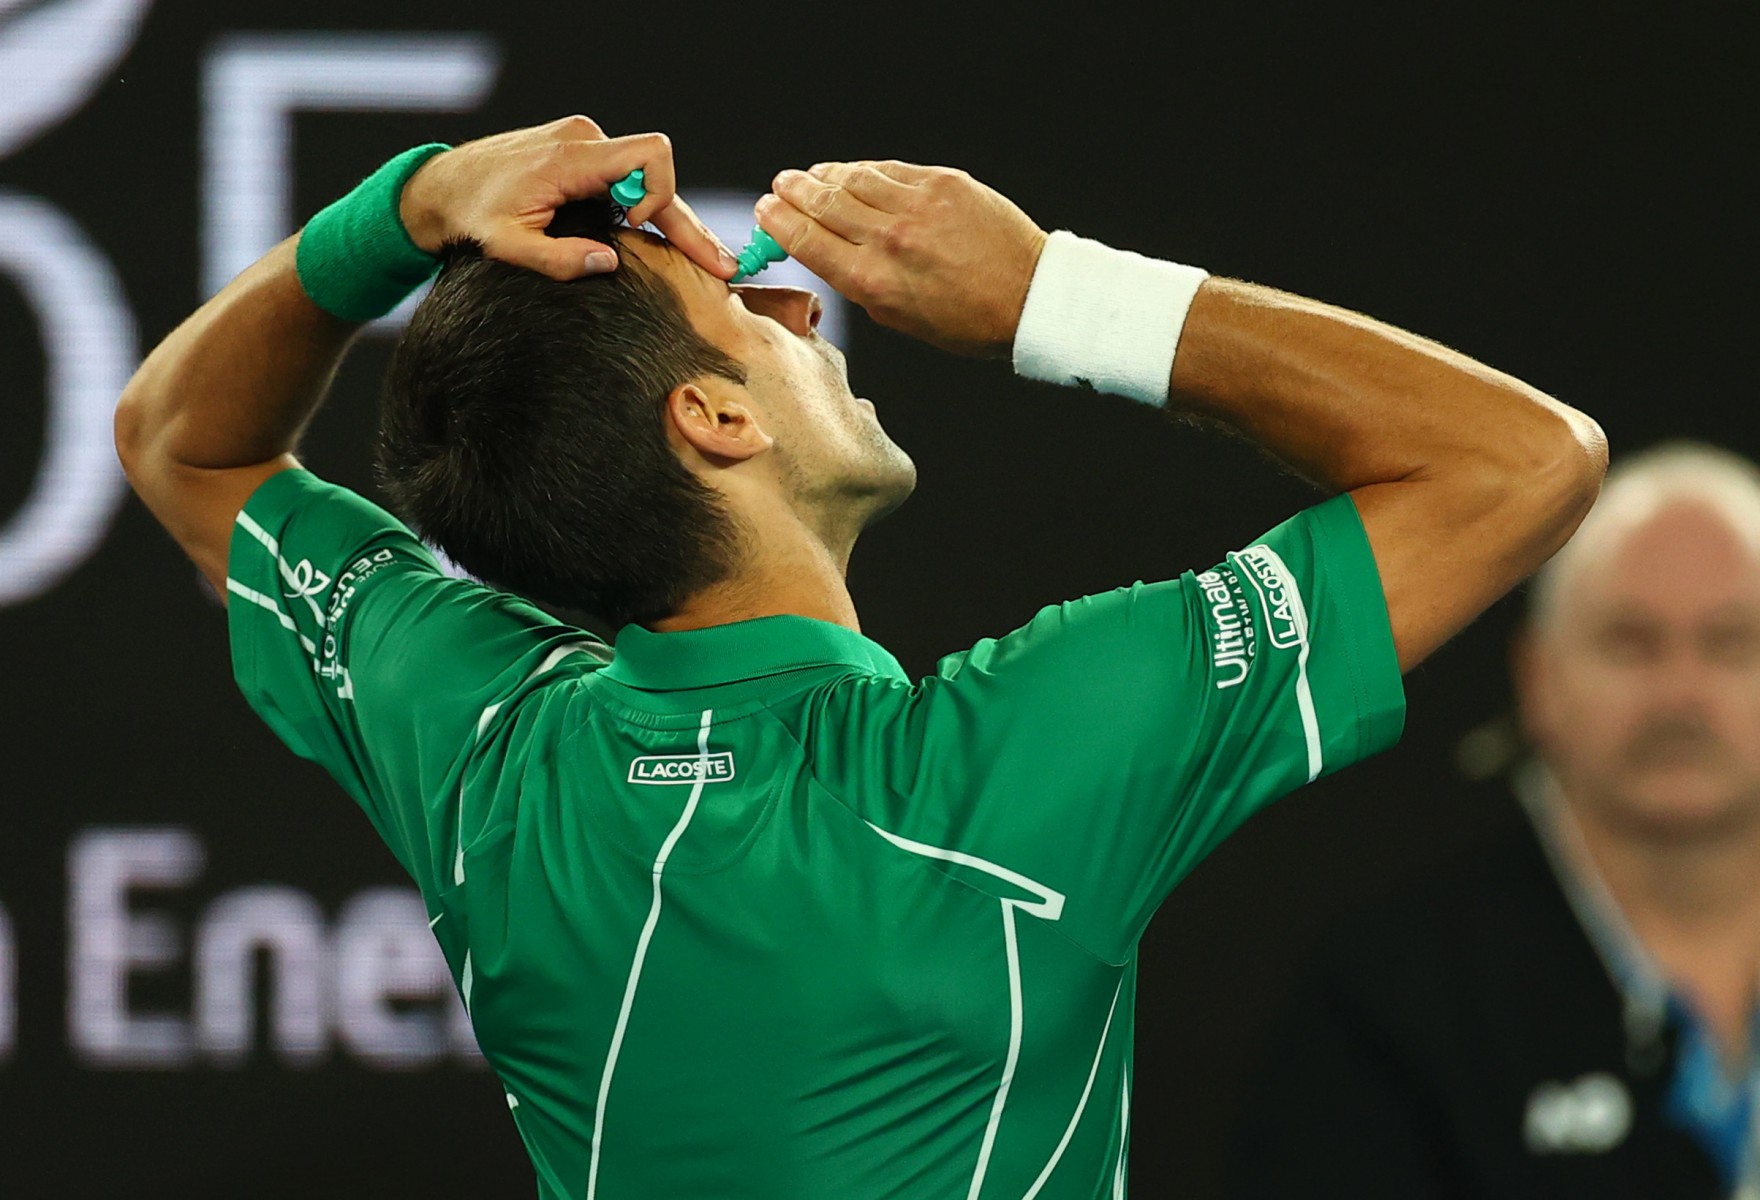 Djokovic had problems with his contact lenses and even went off court for a medical time-out